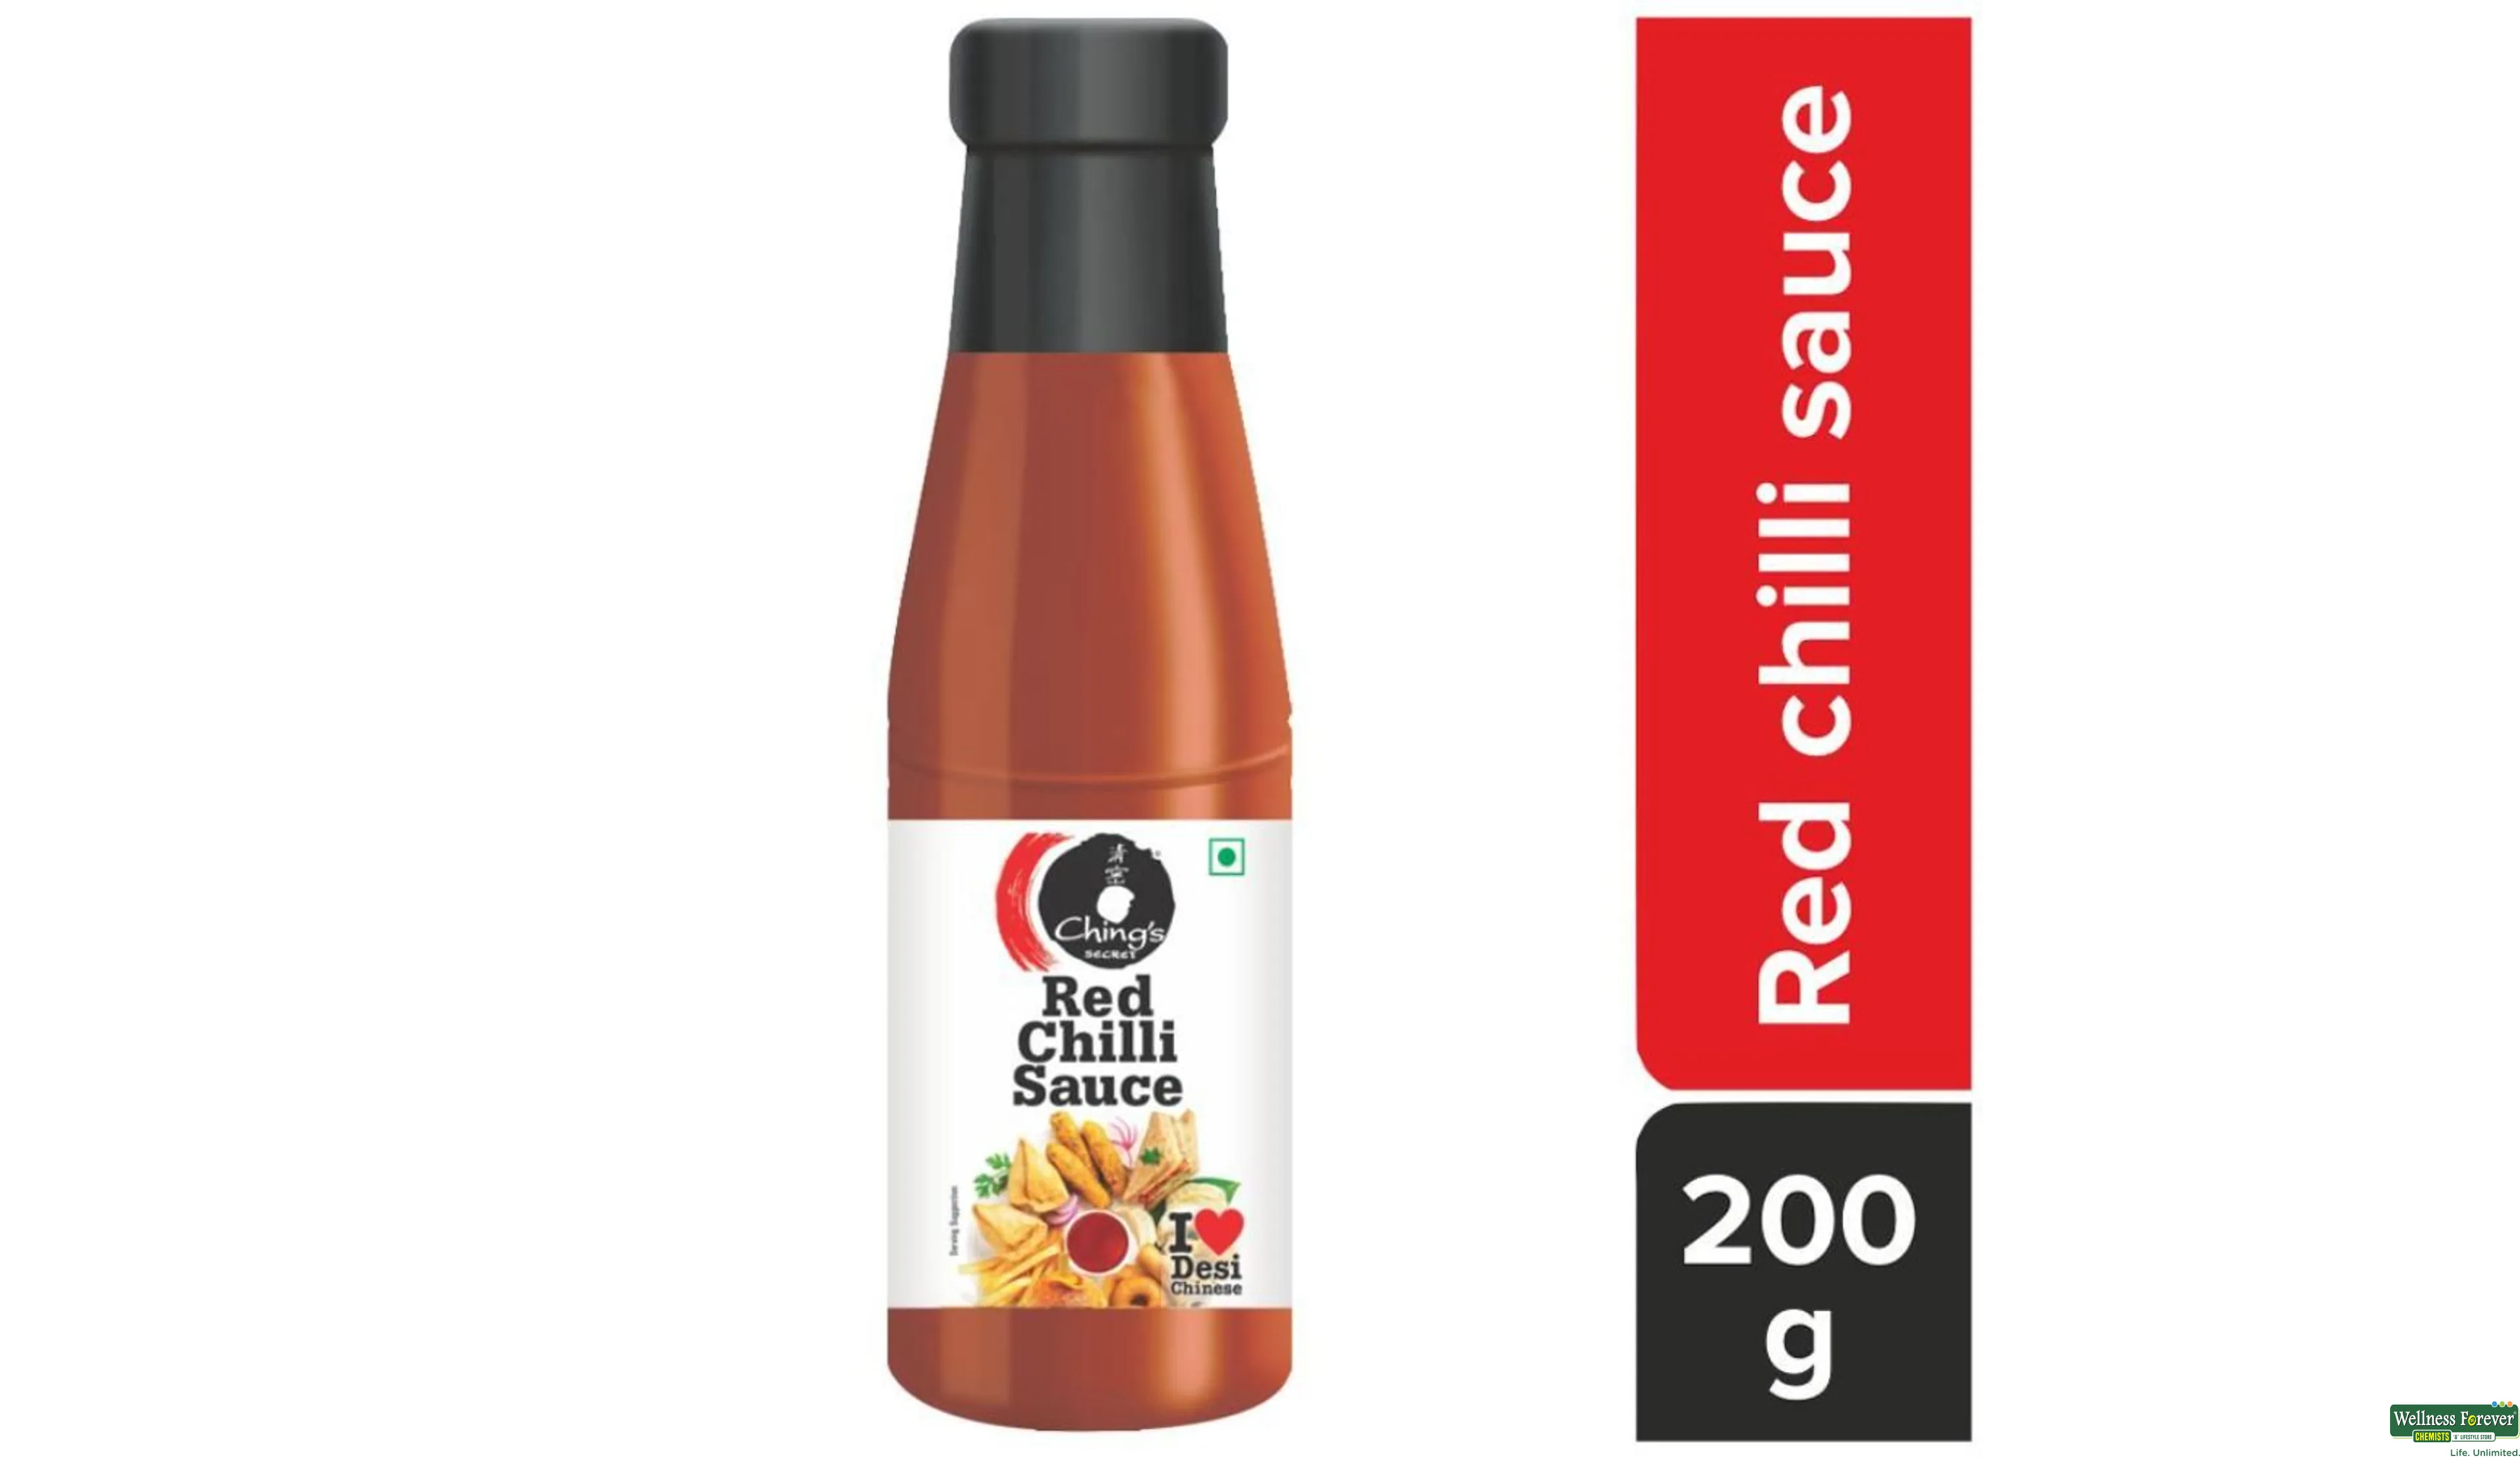 CHINGS RED CHILLI SAUCE 200GM- 1, 200GM, 